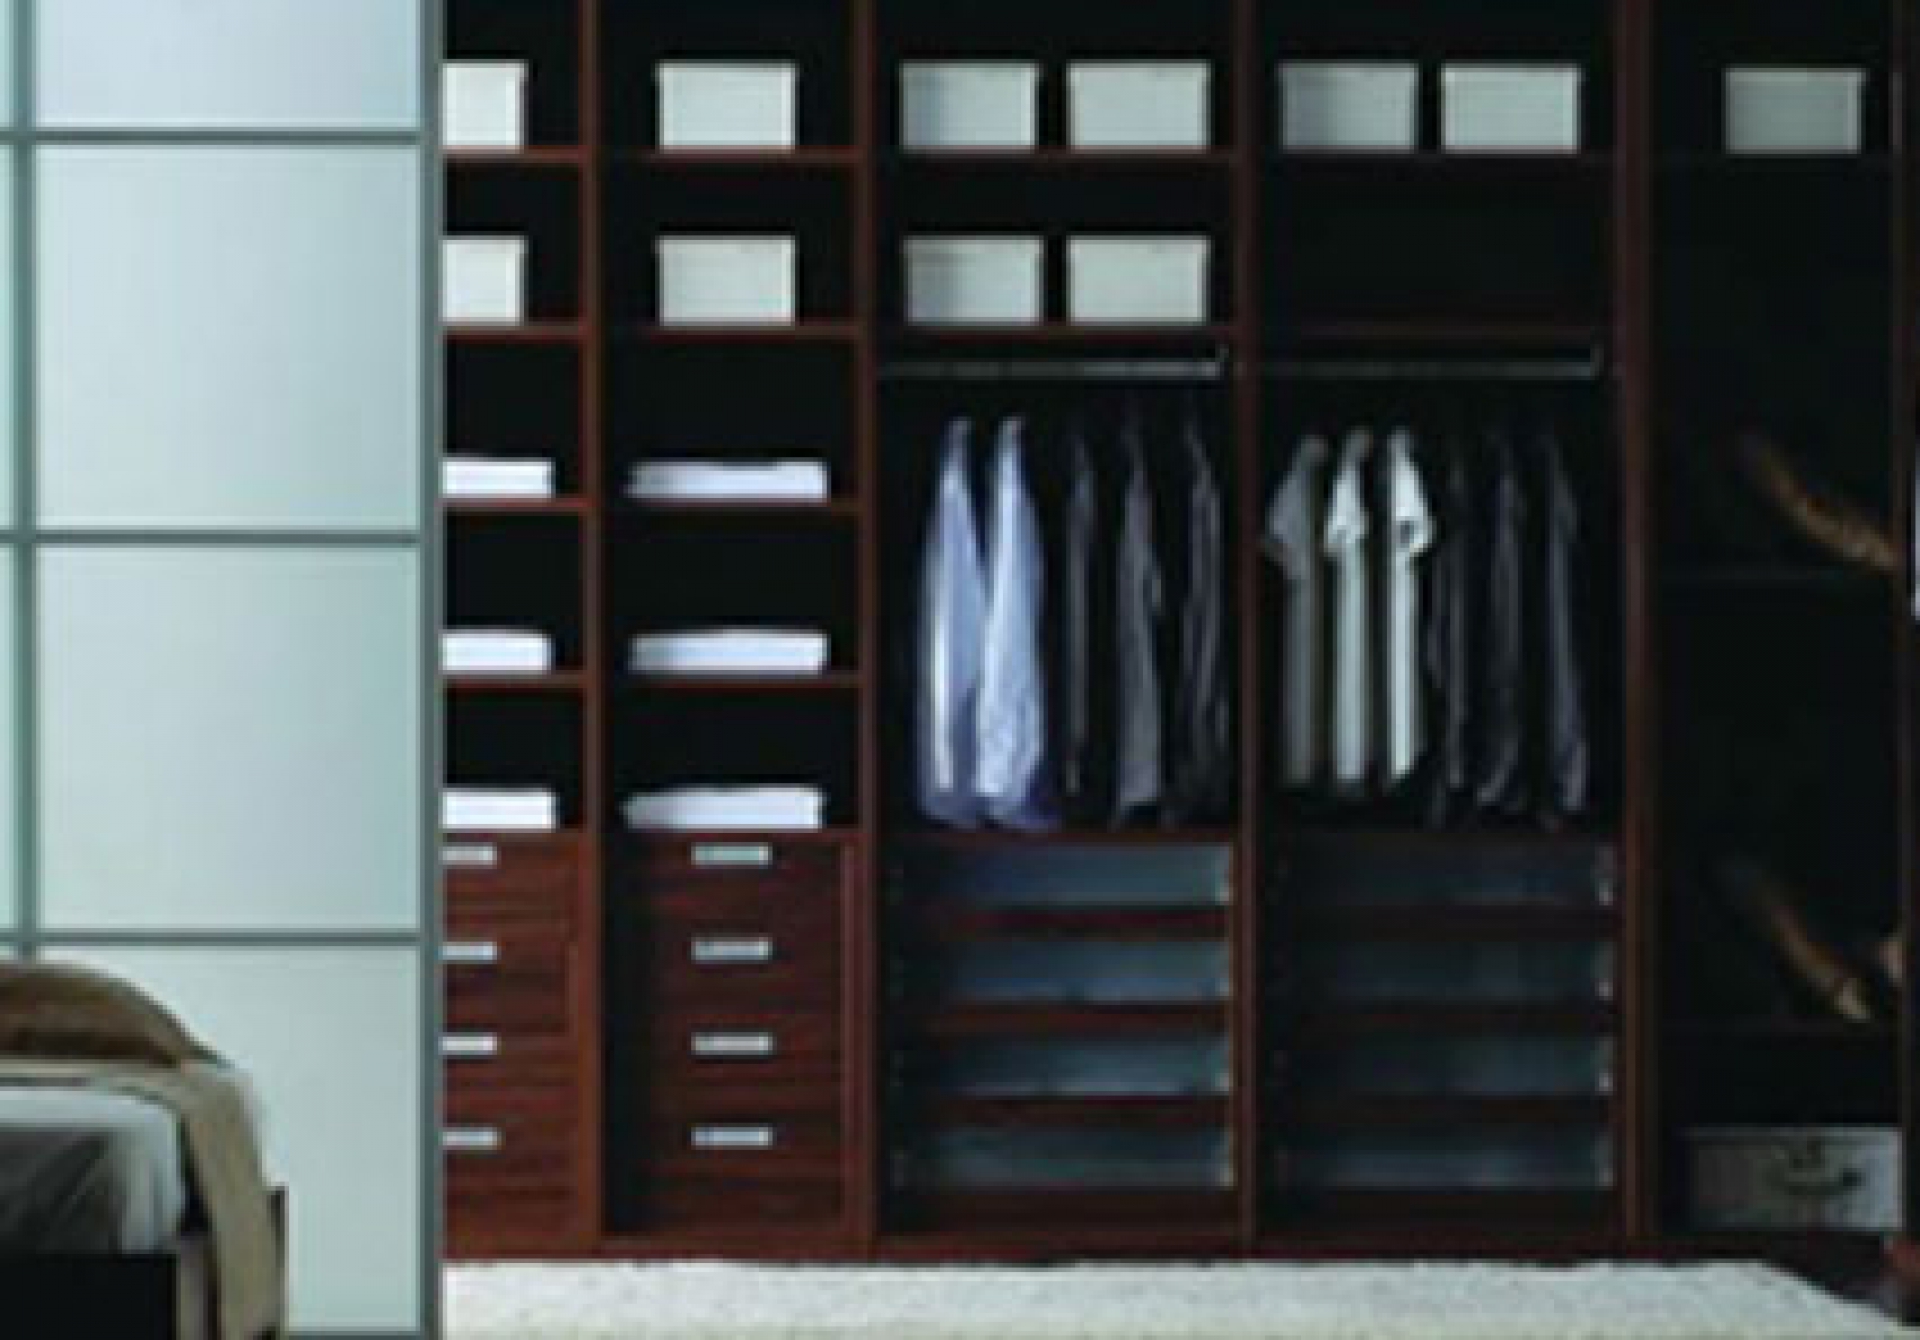 Wardrobes and Closets for Cloakrooms